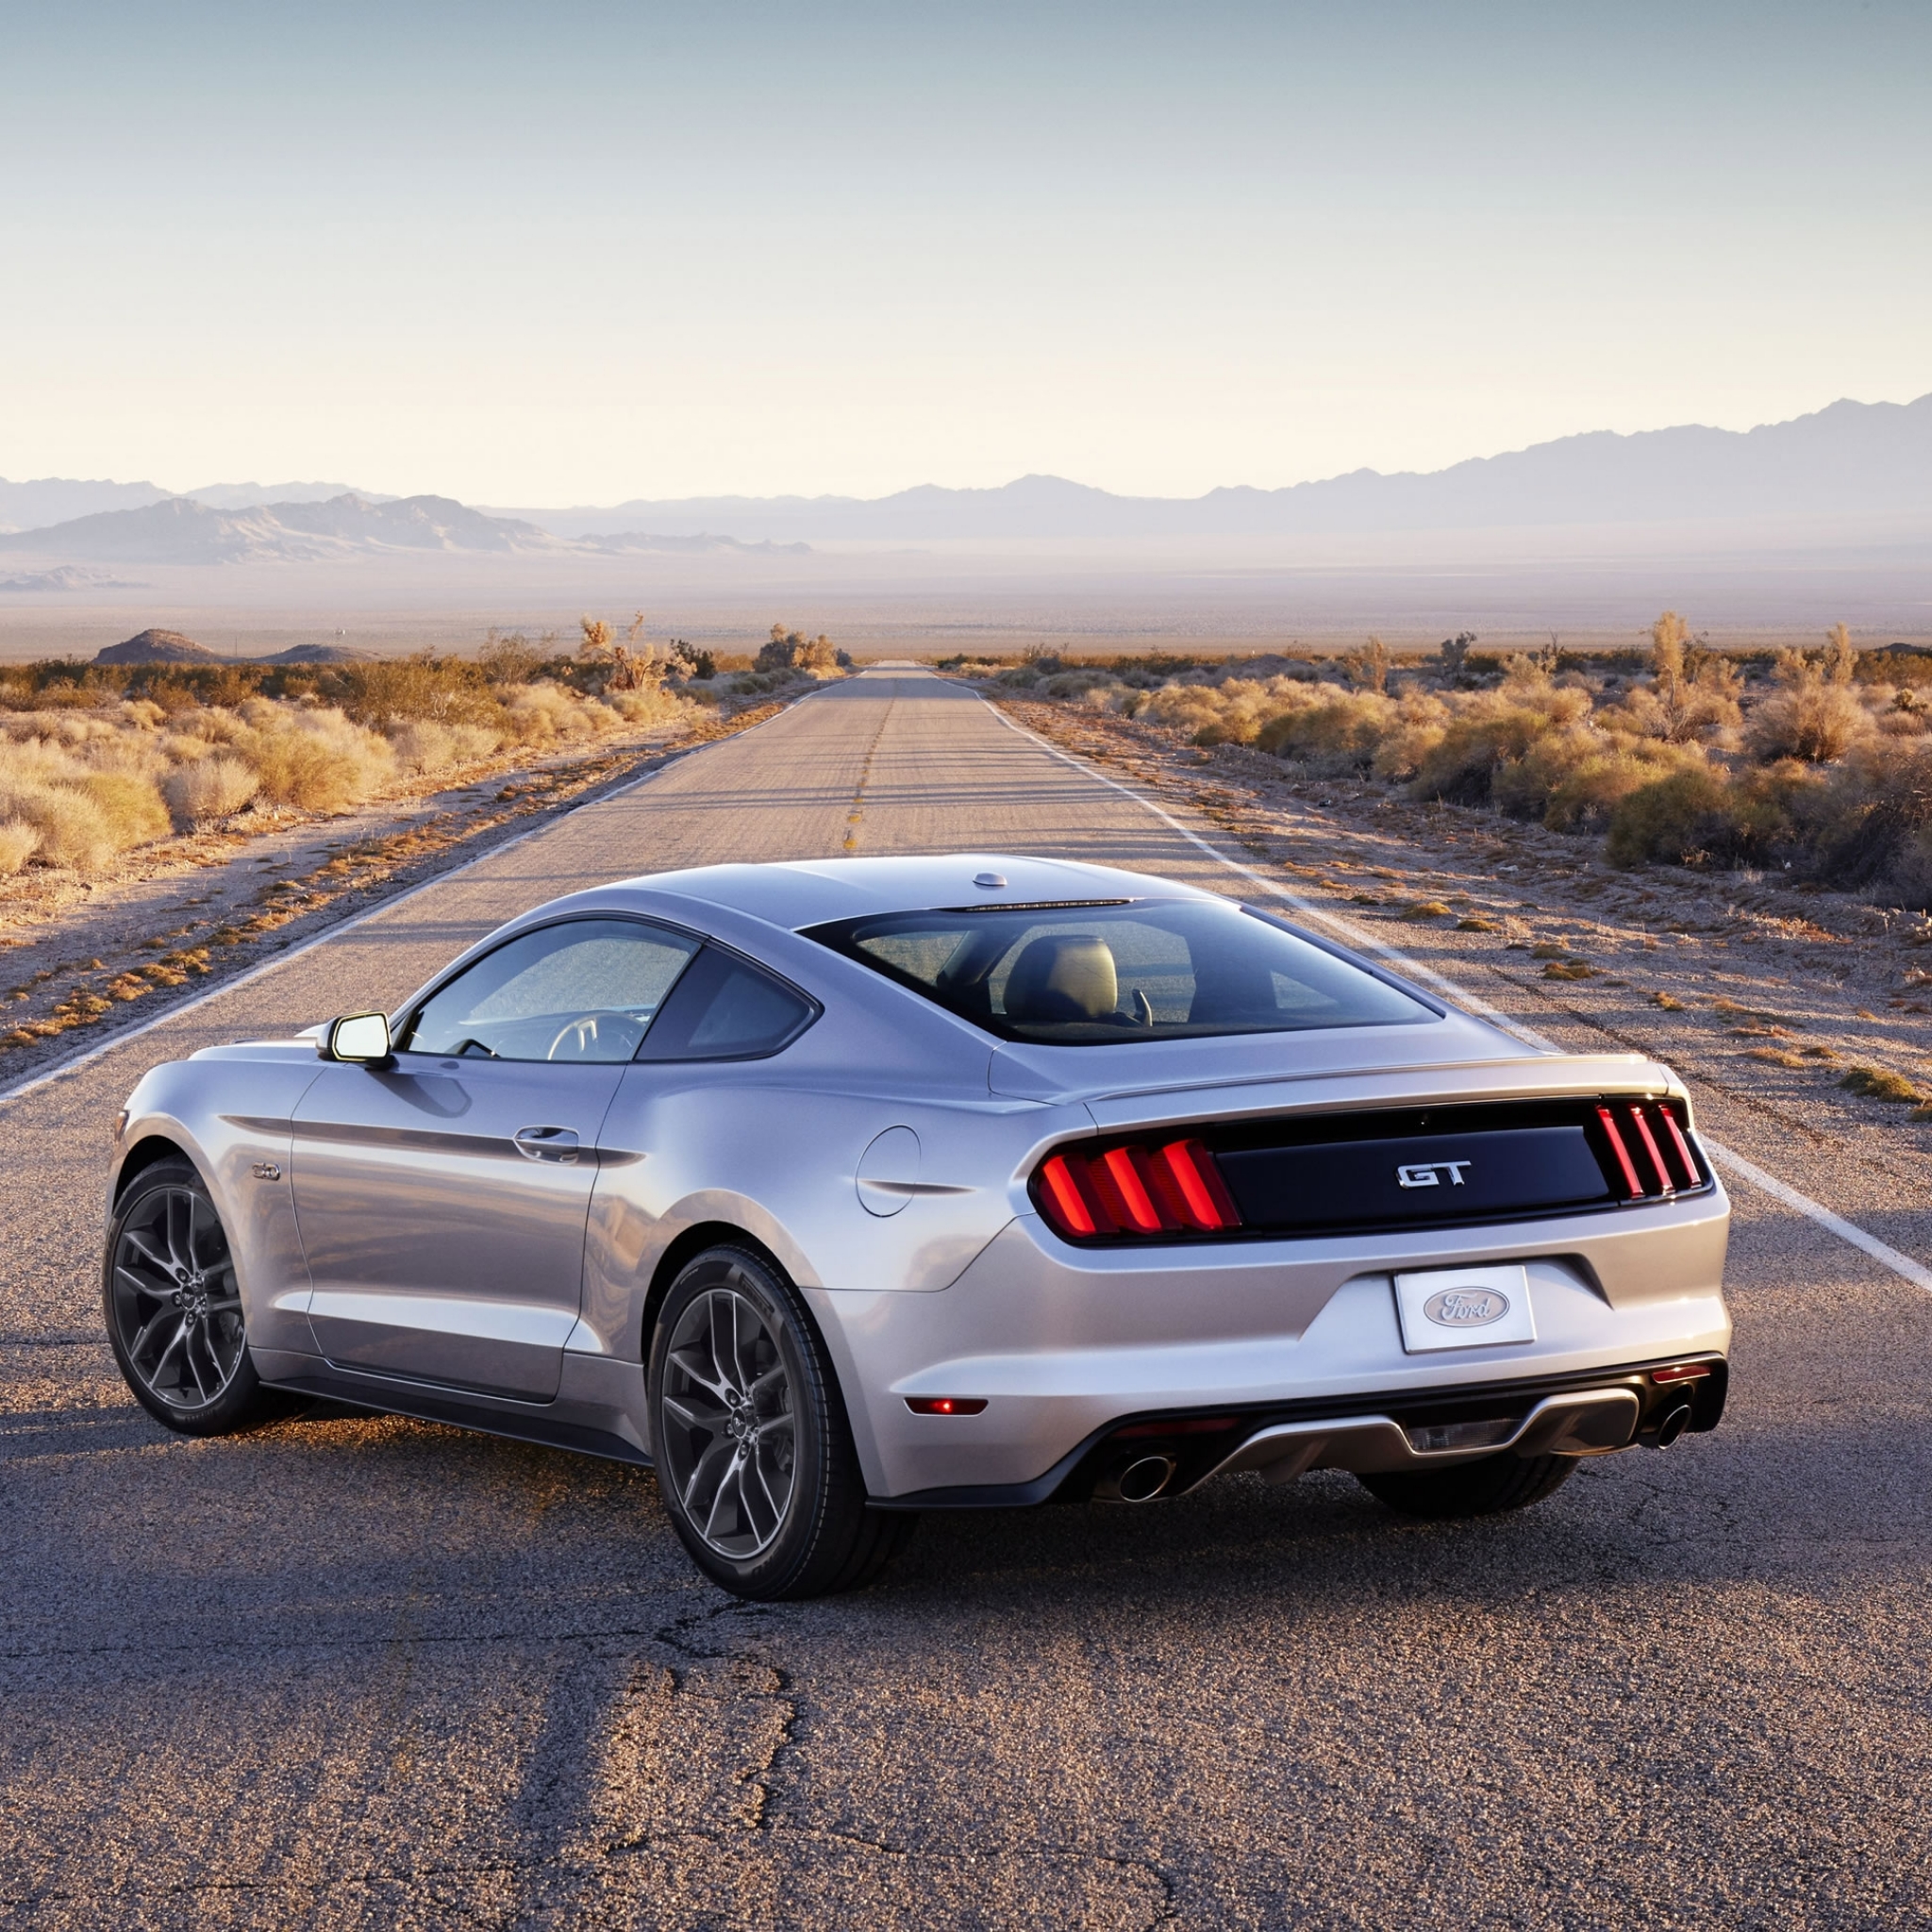 vehicles, 2015 ford mustang gt, road, silver car, desert, ford, ford mustang, car